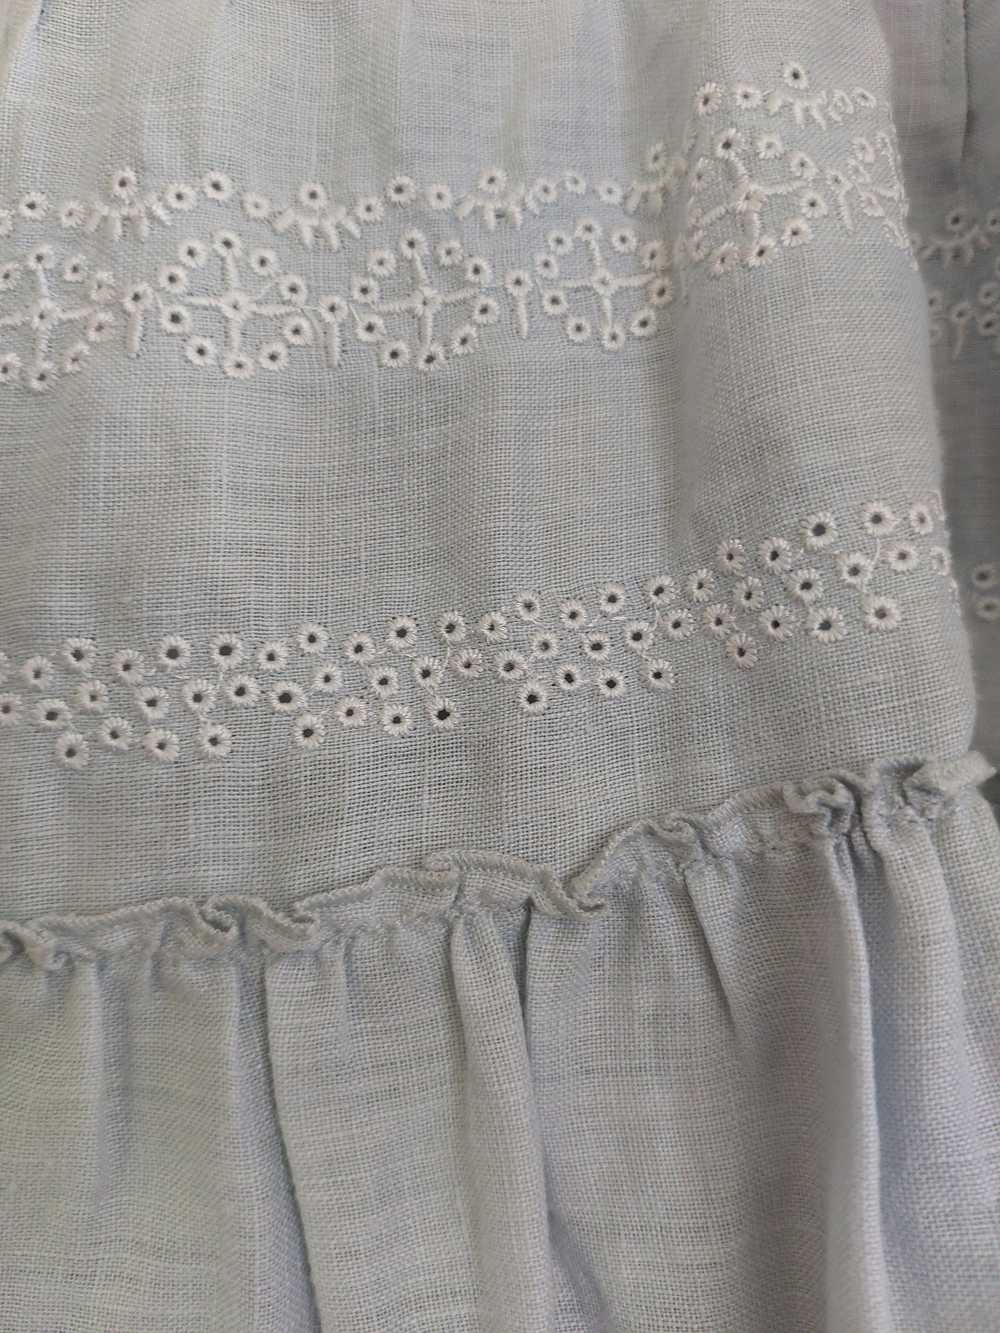 Embroidered skirt - Gerard Darel pale blue and wh… - image 2